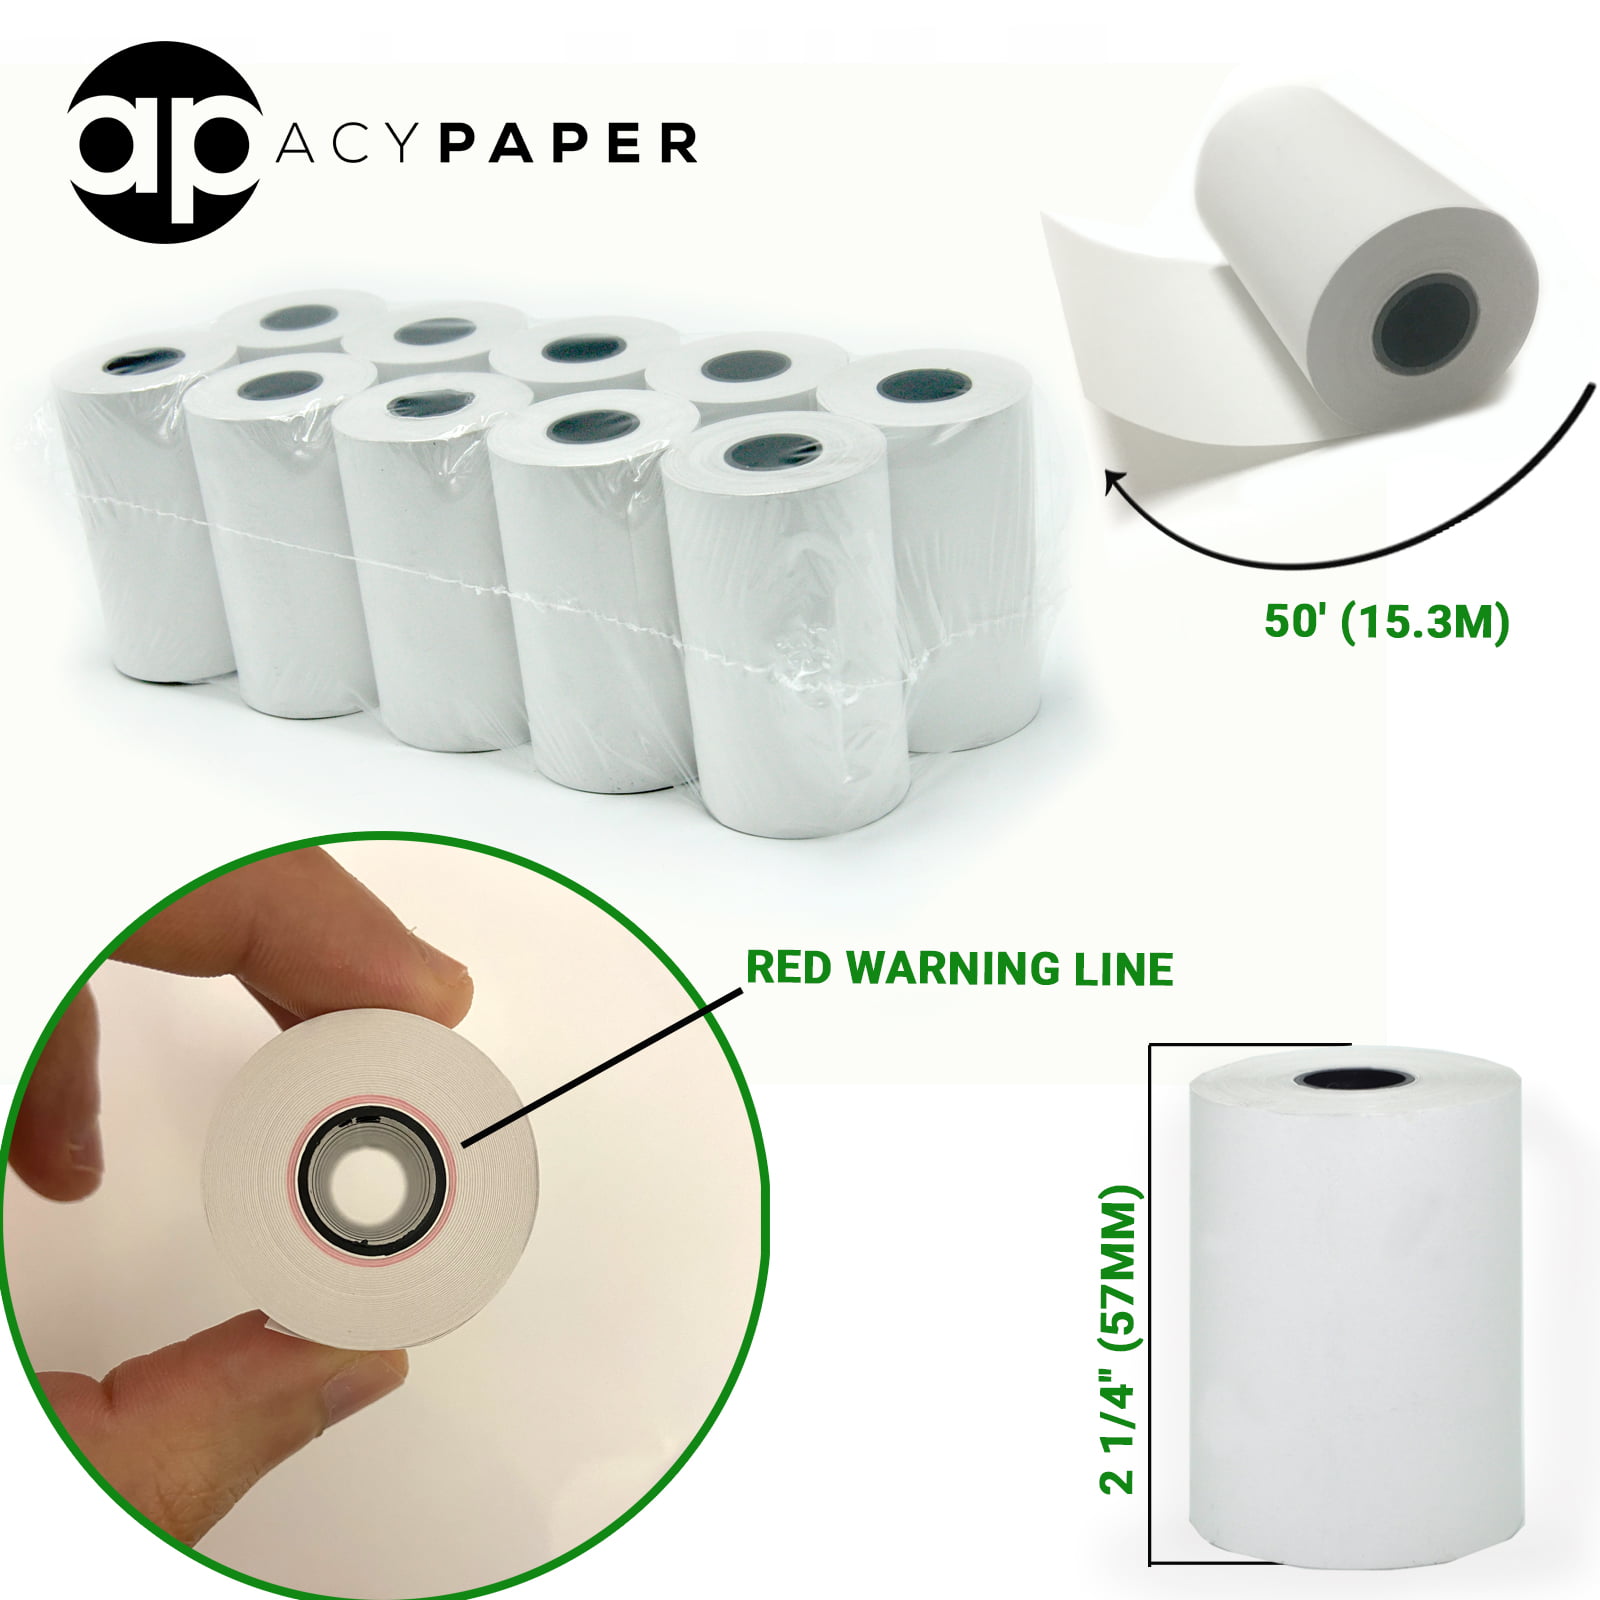 2-1/4" x 50' THERMAL RECEIPT PAPER VERIFONE vx520 36 ROLLS ~FREE SHIPPING~